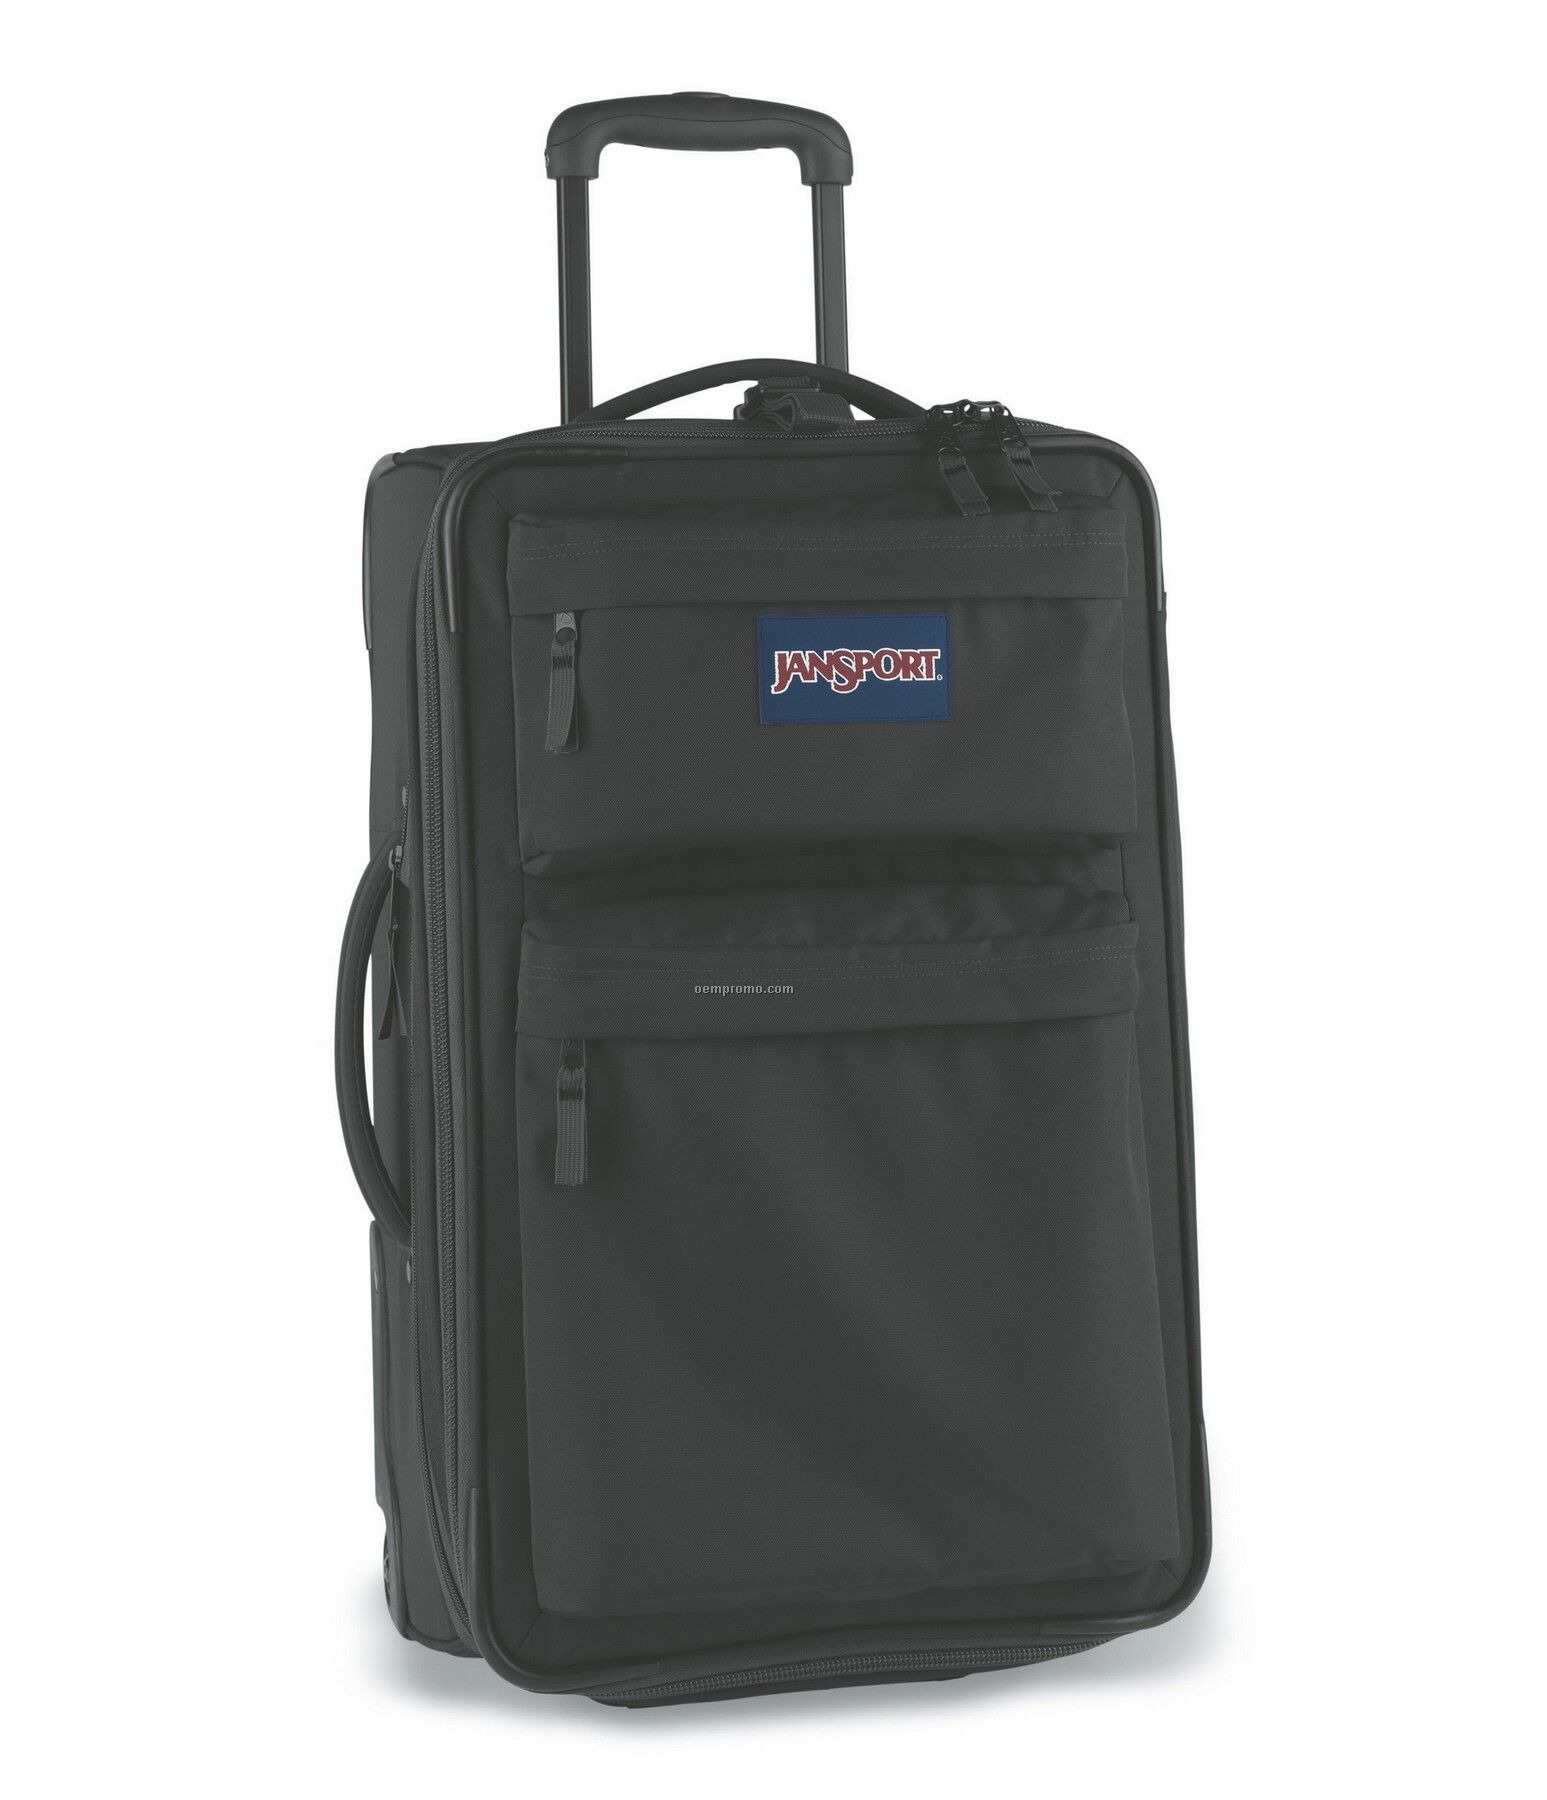 Jansport Travel Collection 22" Upright Luggage